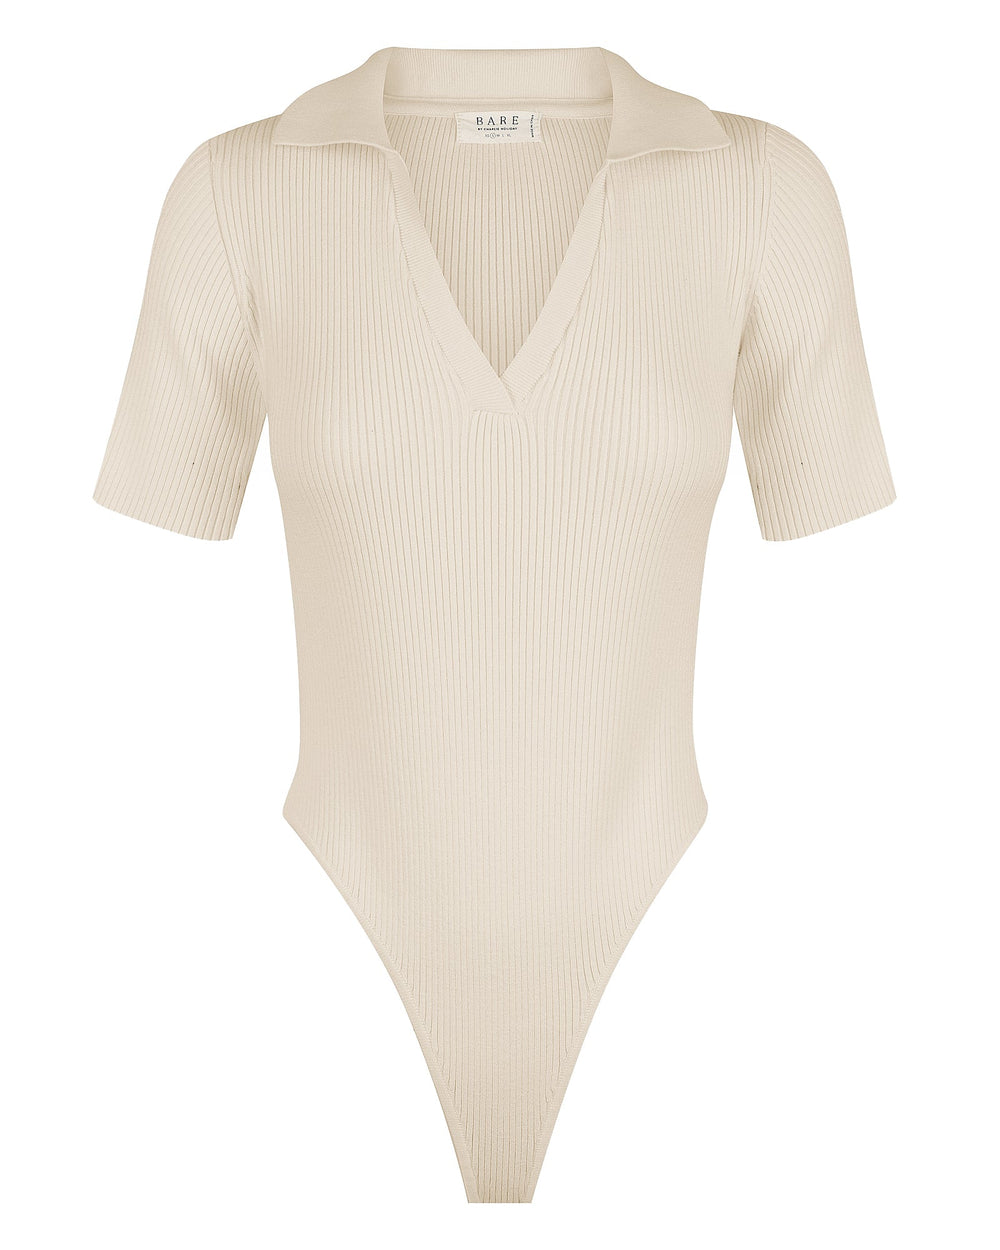 The Ribbed Knit Bodysuit